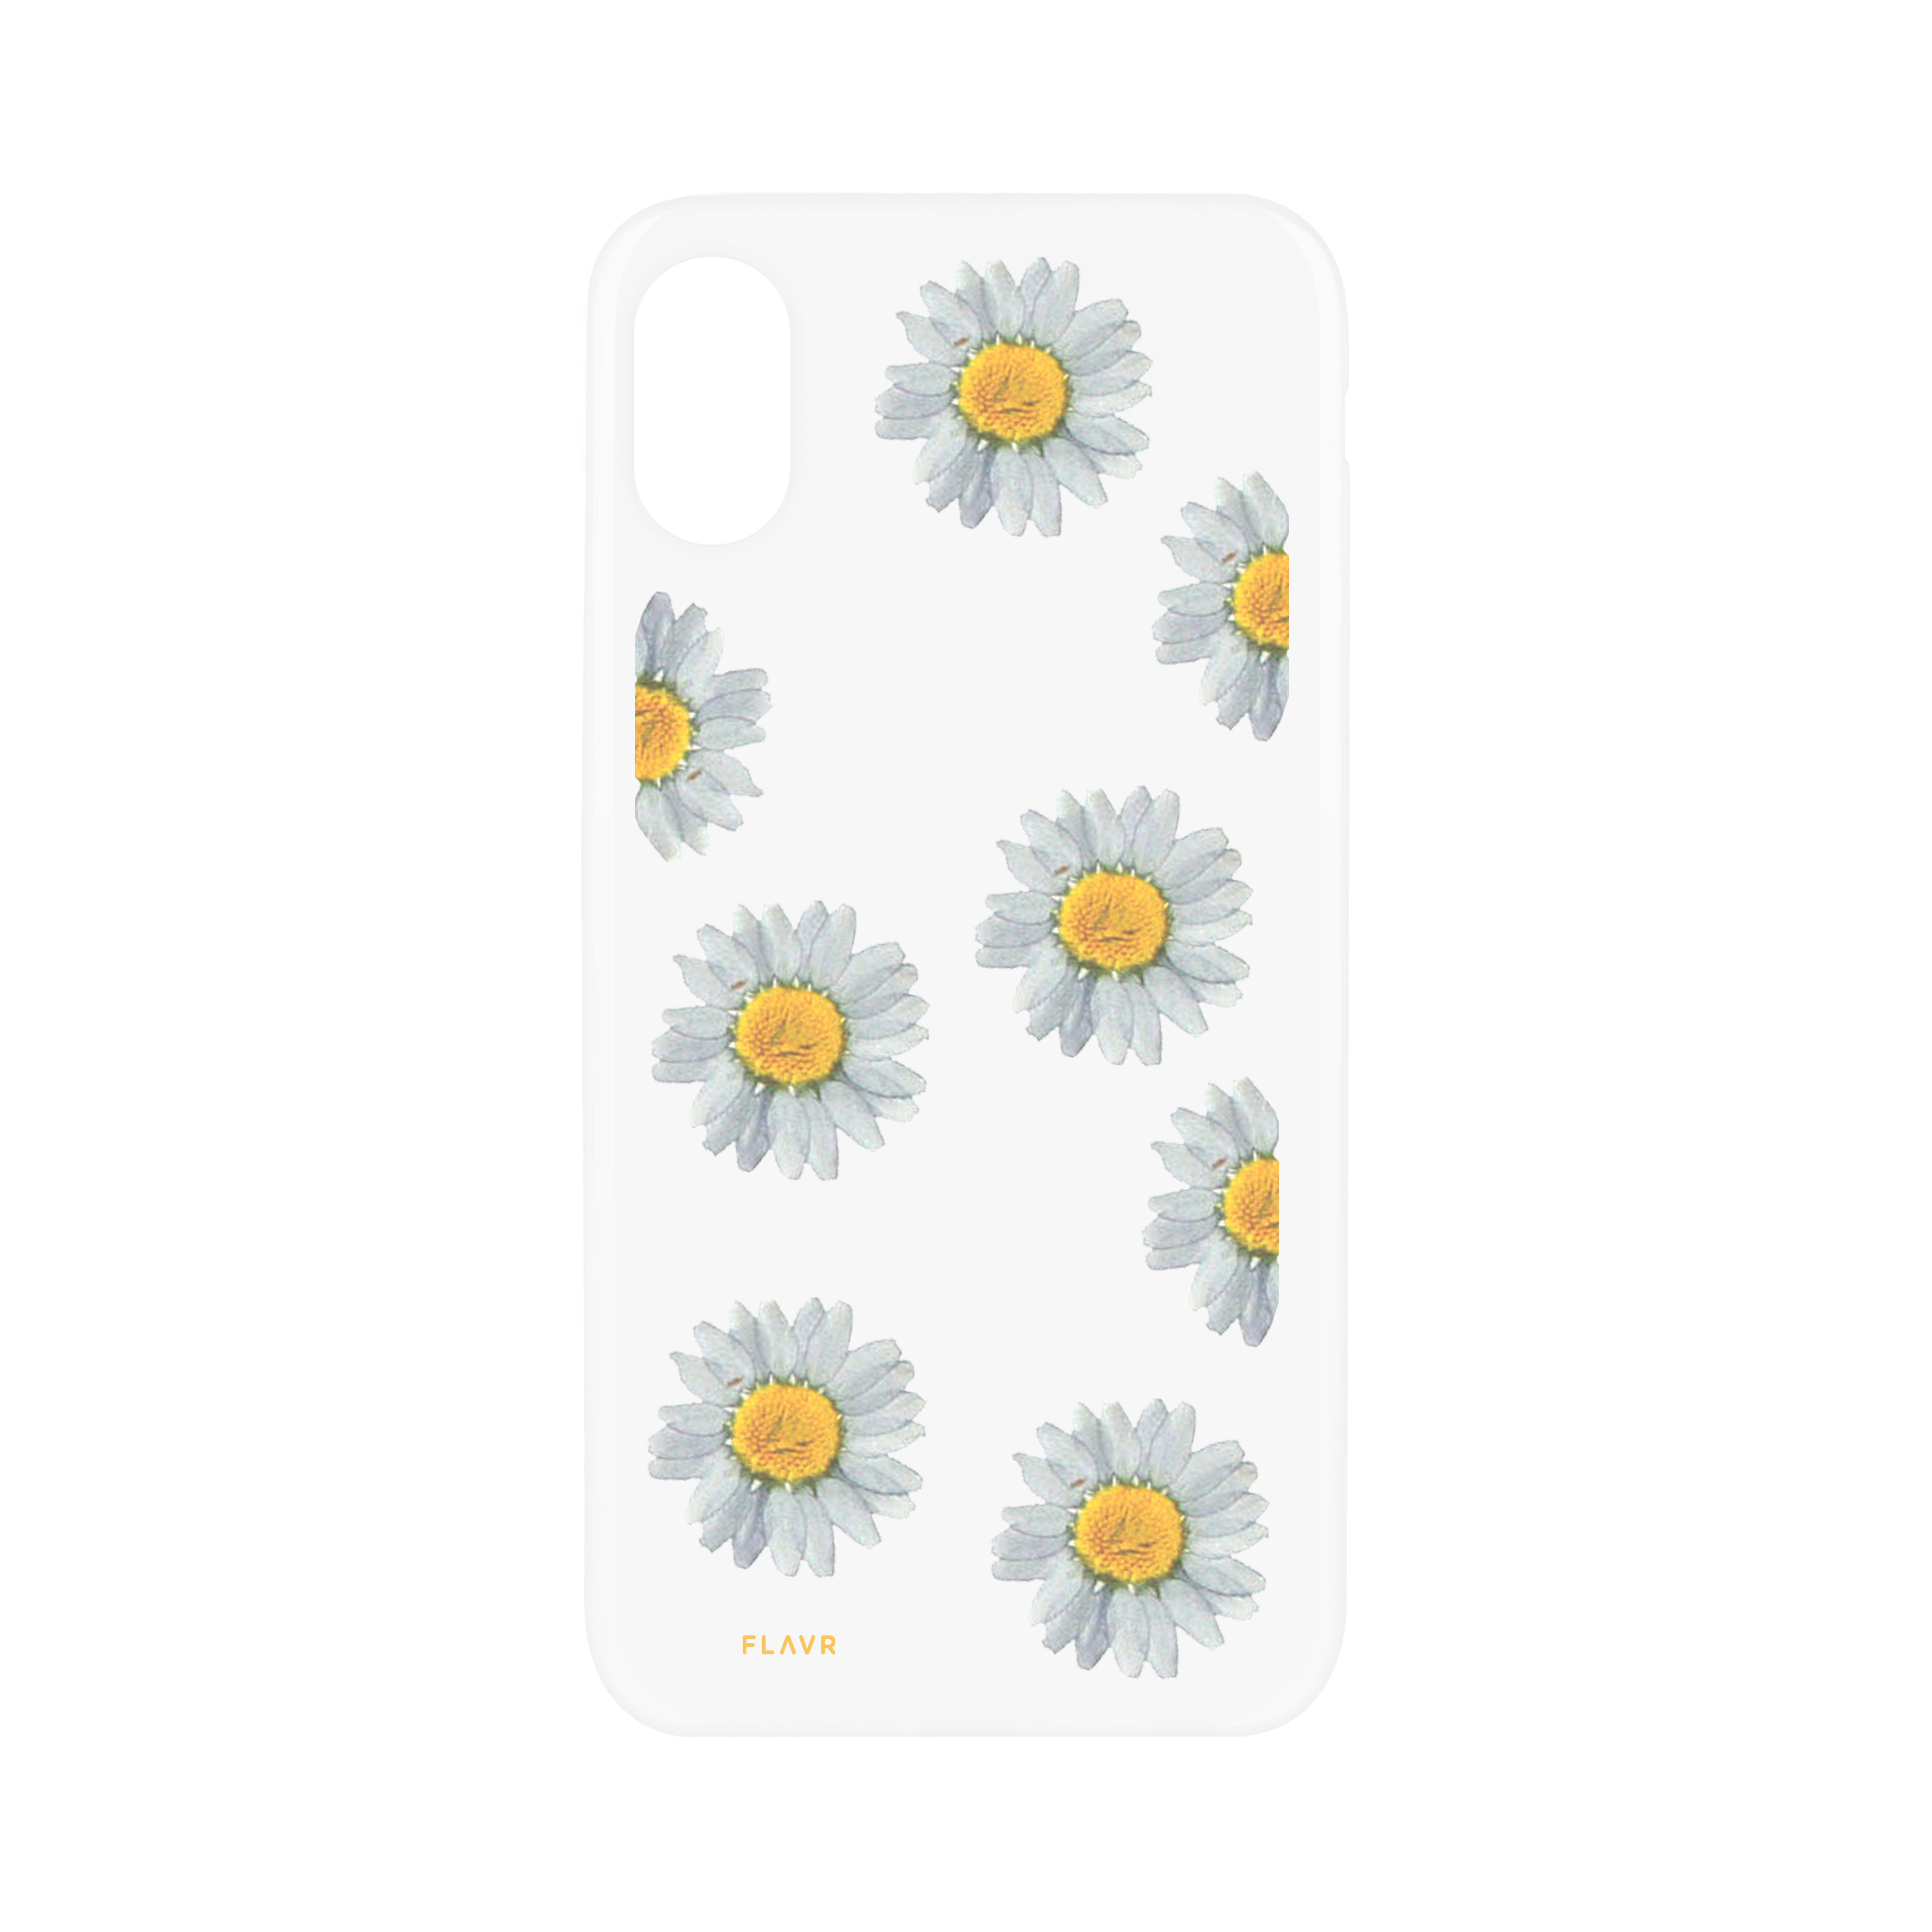 Flower iPlate COLOURFUL APPLE, Daisy, IPHONE X/XS, Real Backcover, FLAVR